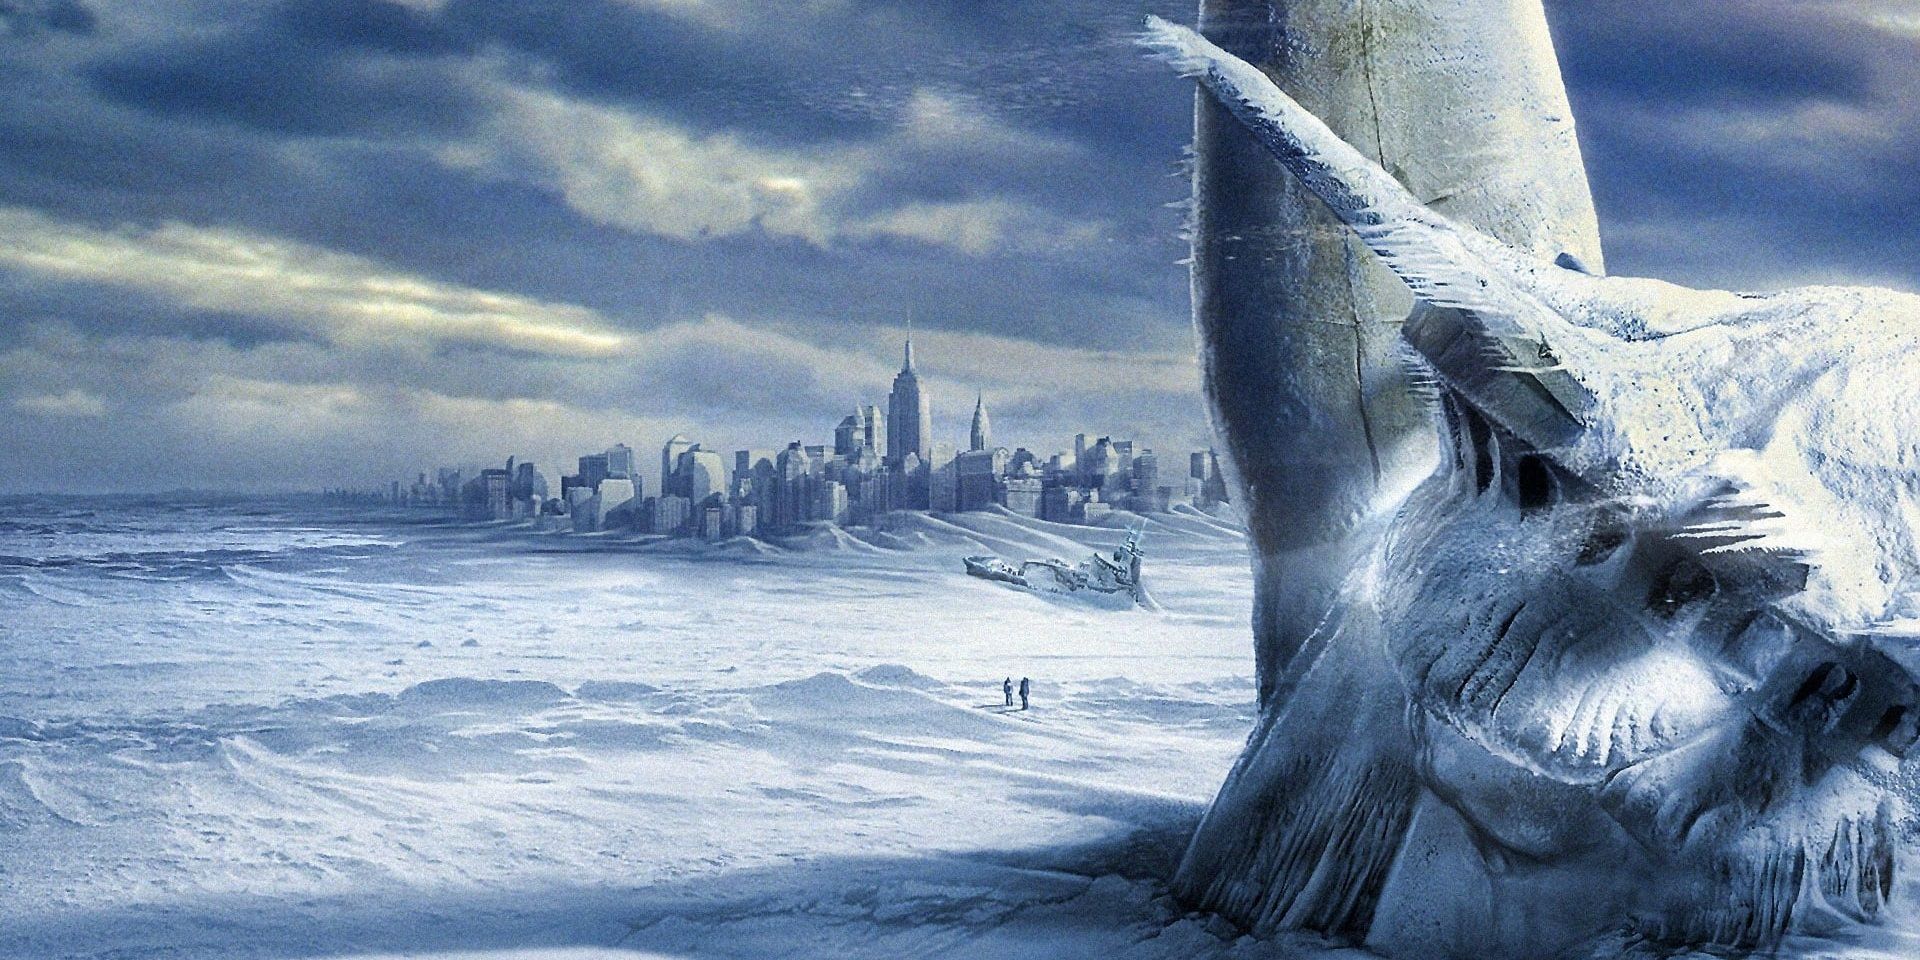 The Statue of Liberty submerged in ice, with NYC in the background surrounded by frozen wasteland in The Day After Tomorrow.